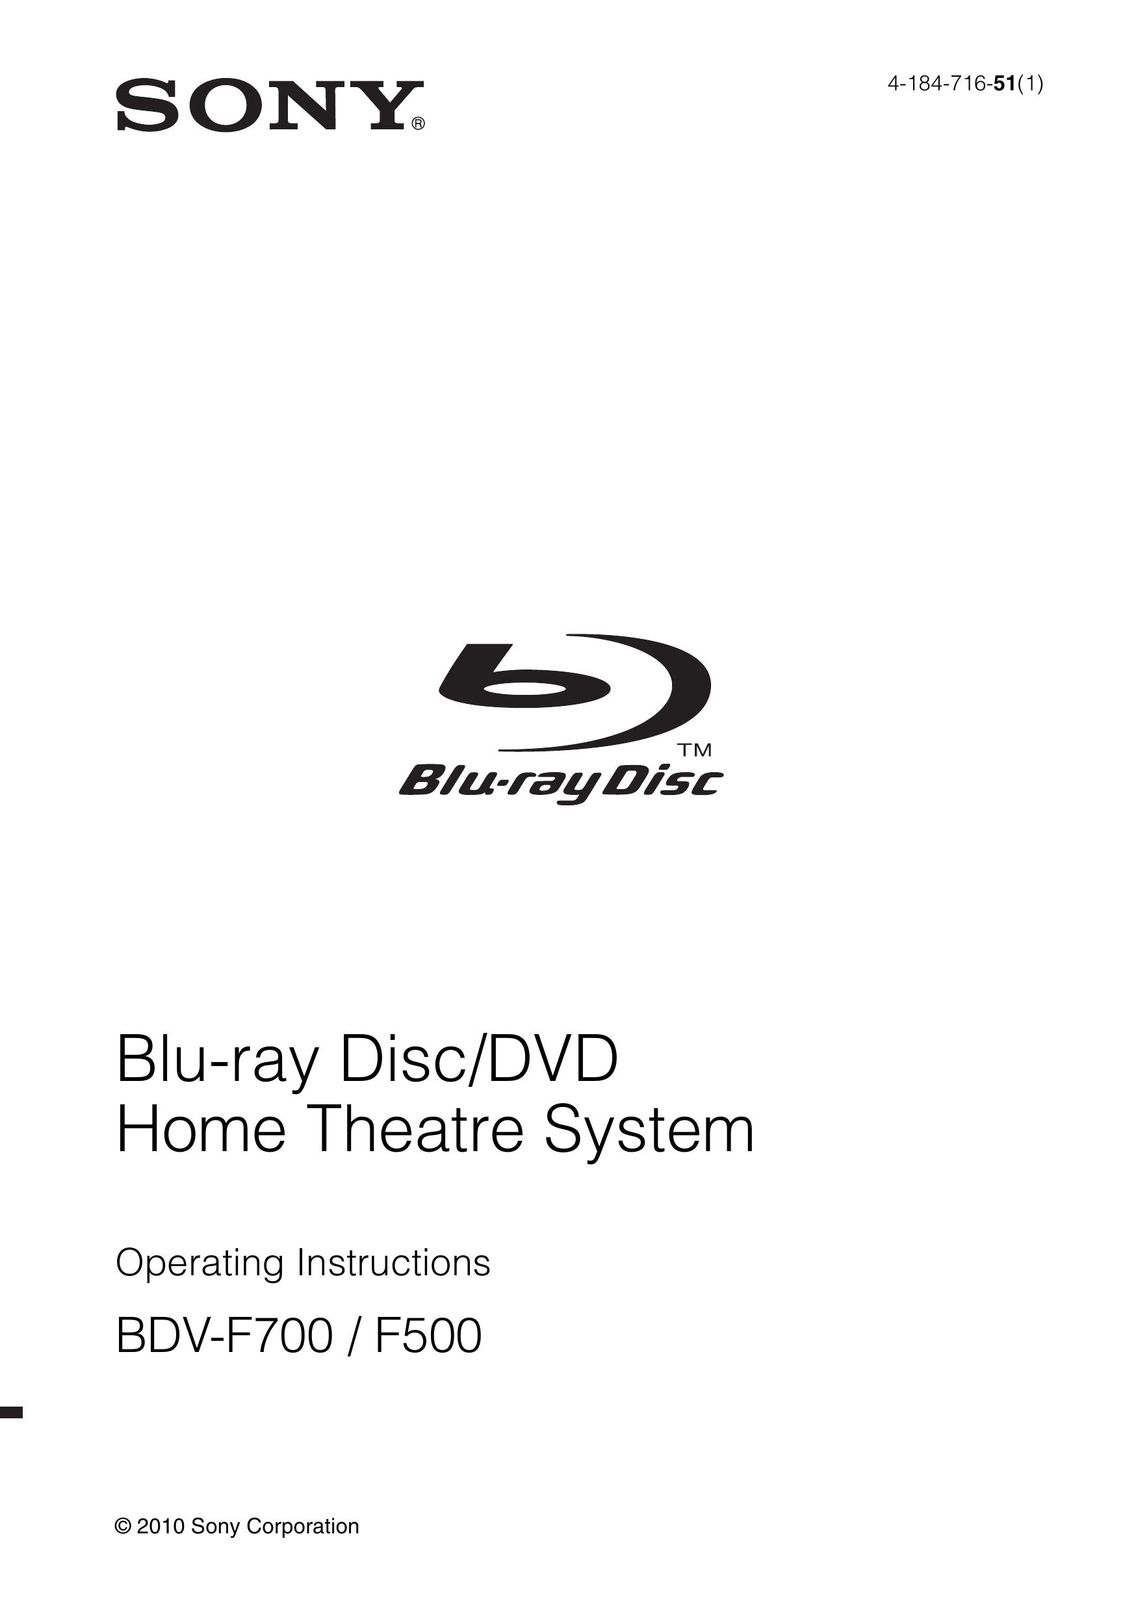 Sony BDV-F500 Home Theater System User Manual